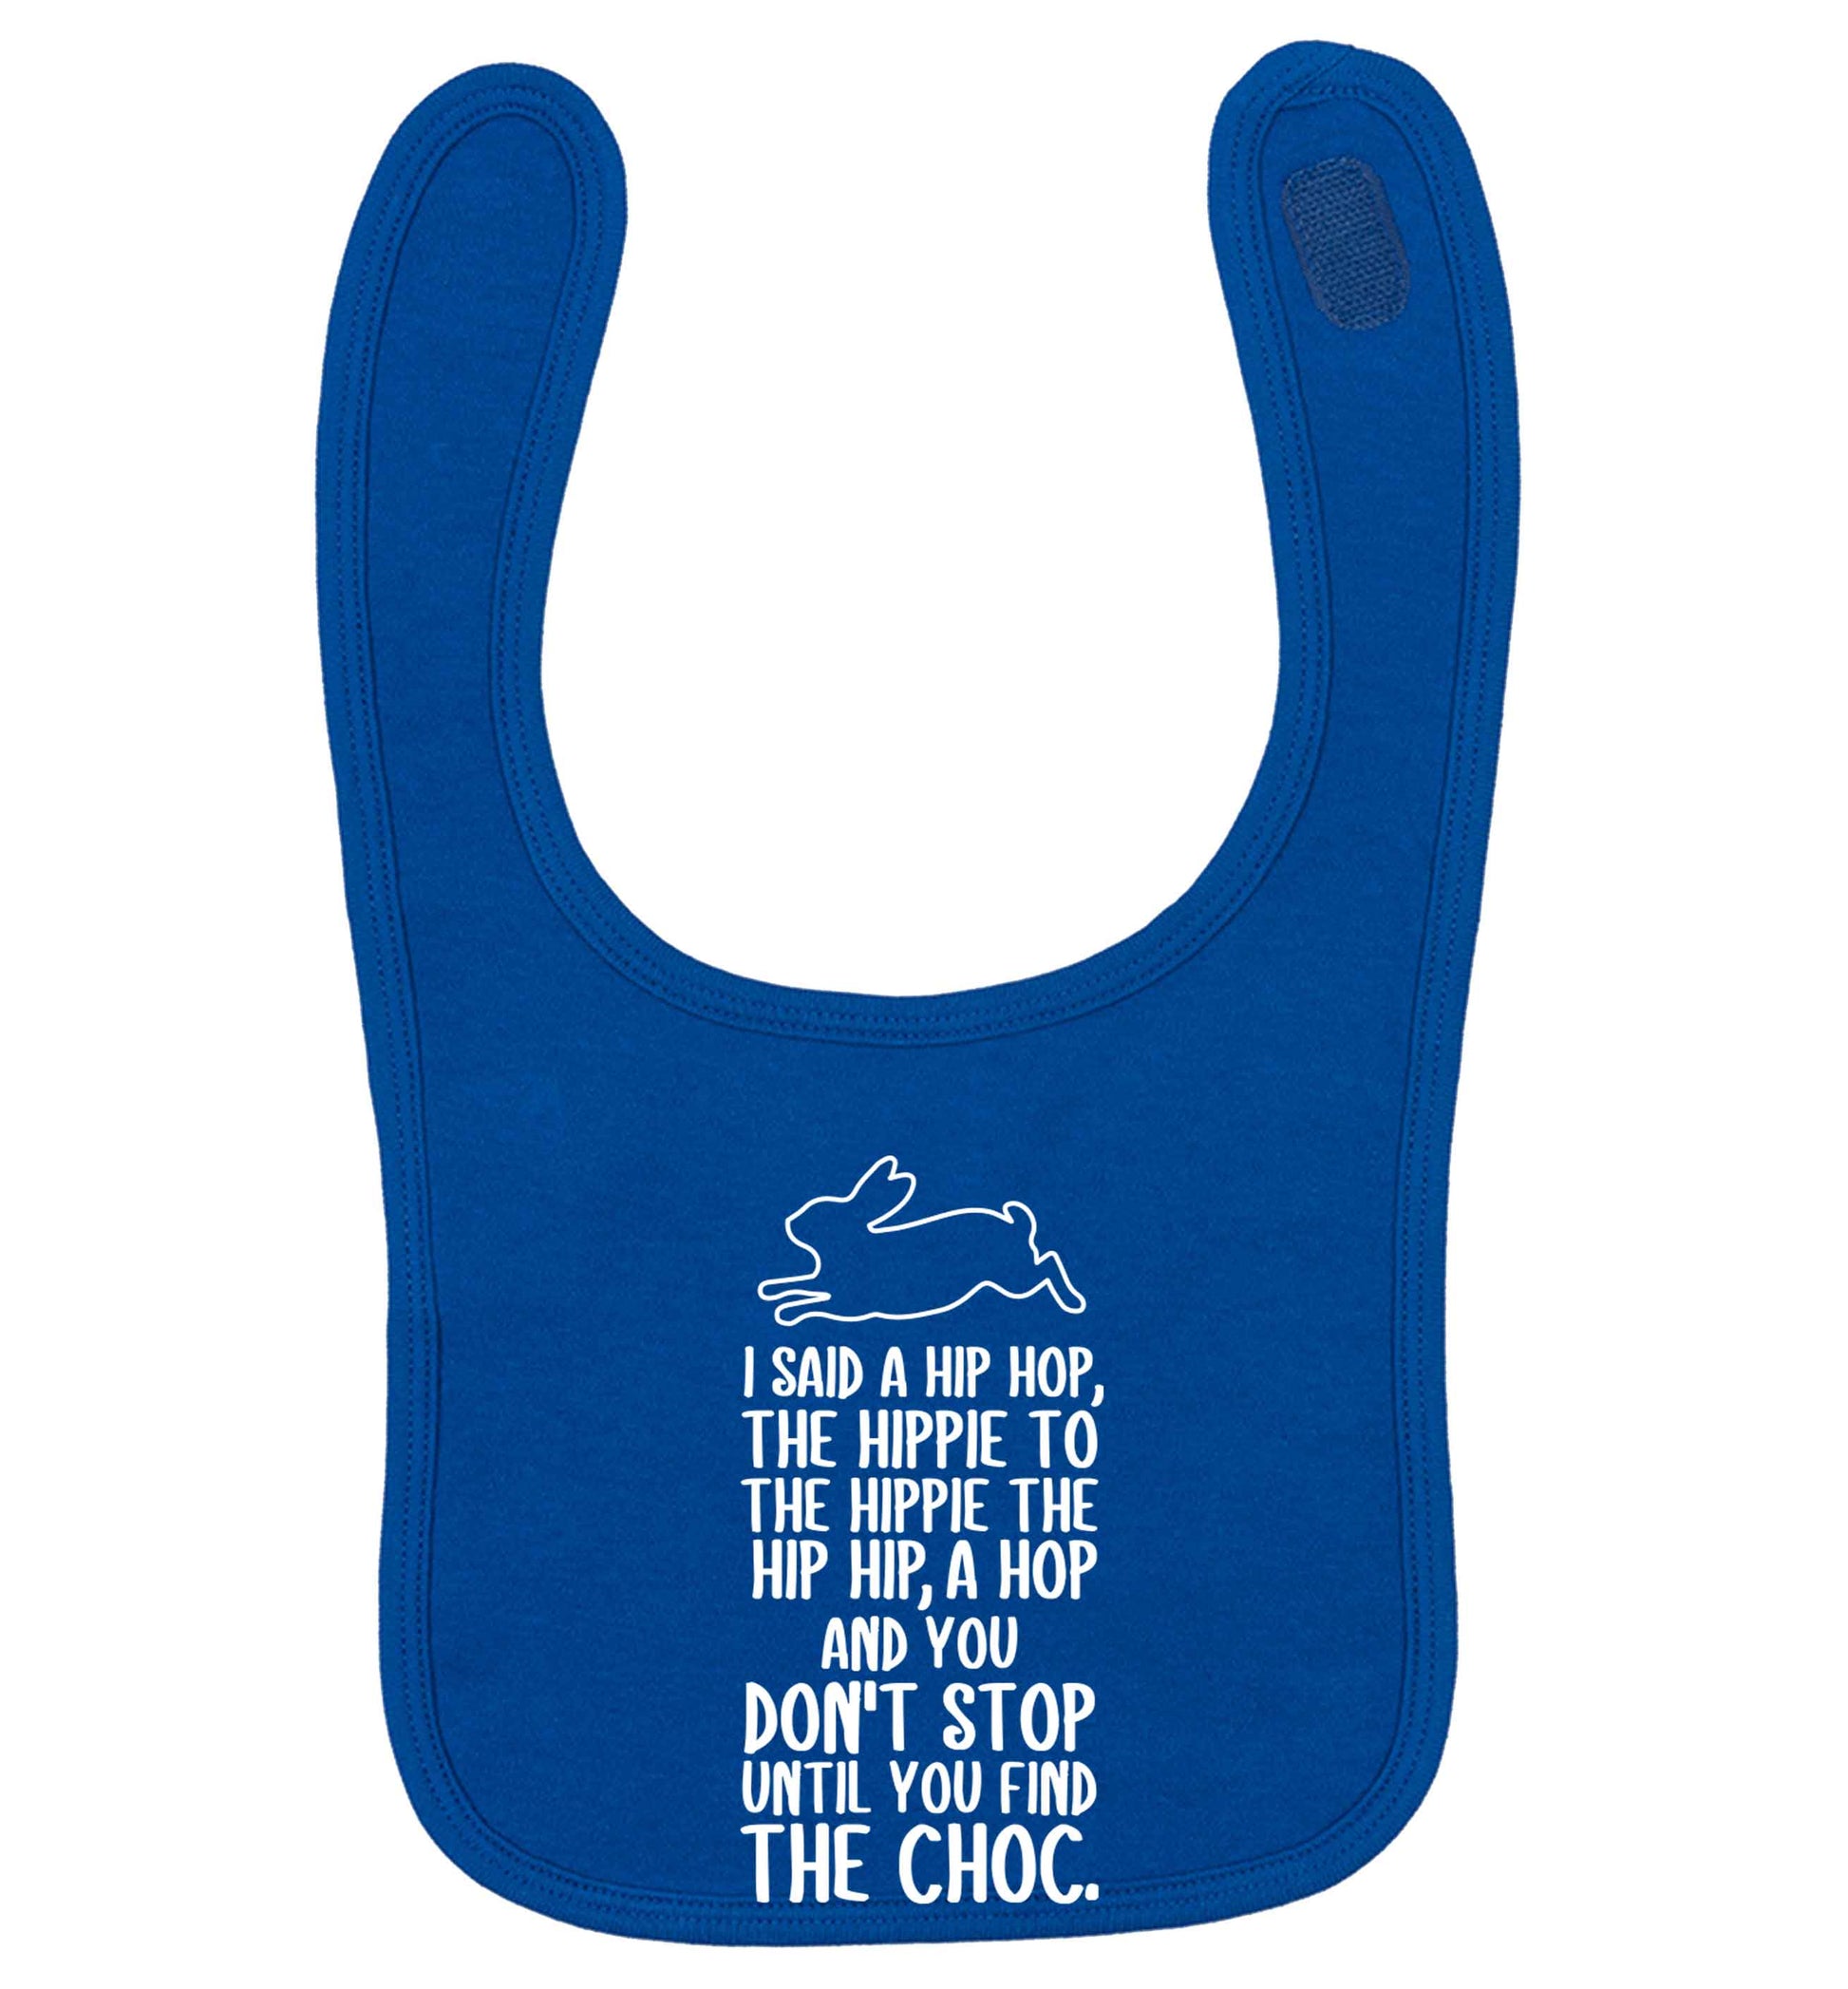 Don't stop until you find the choc royal blue baby bib